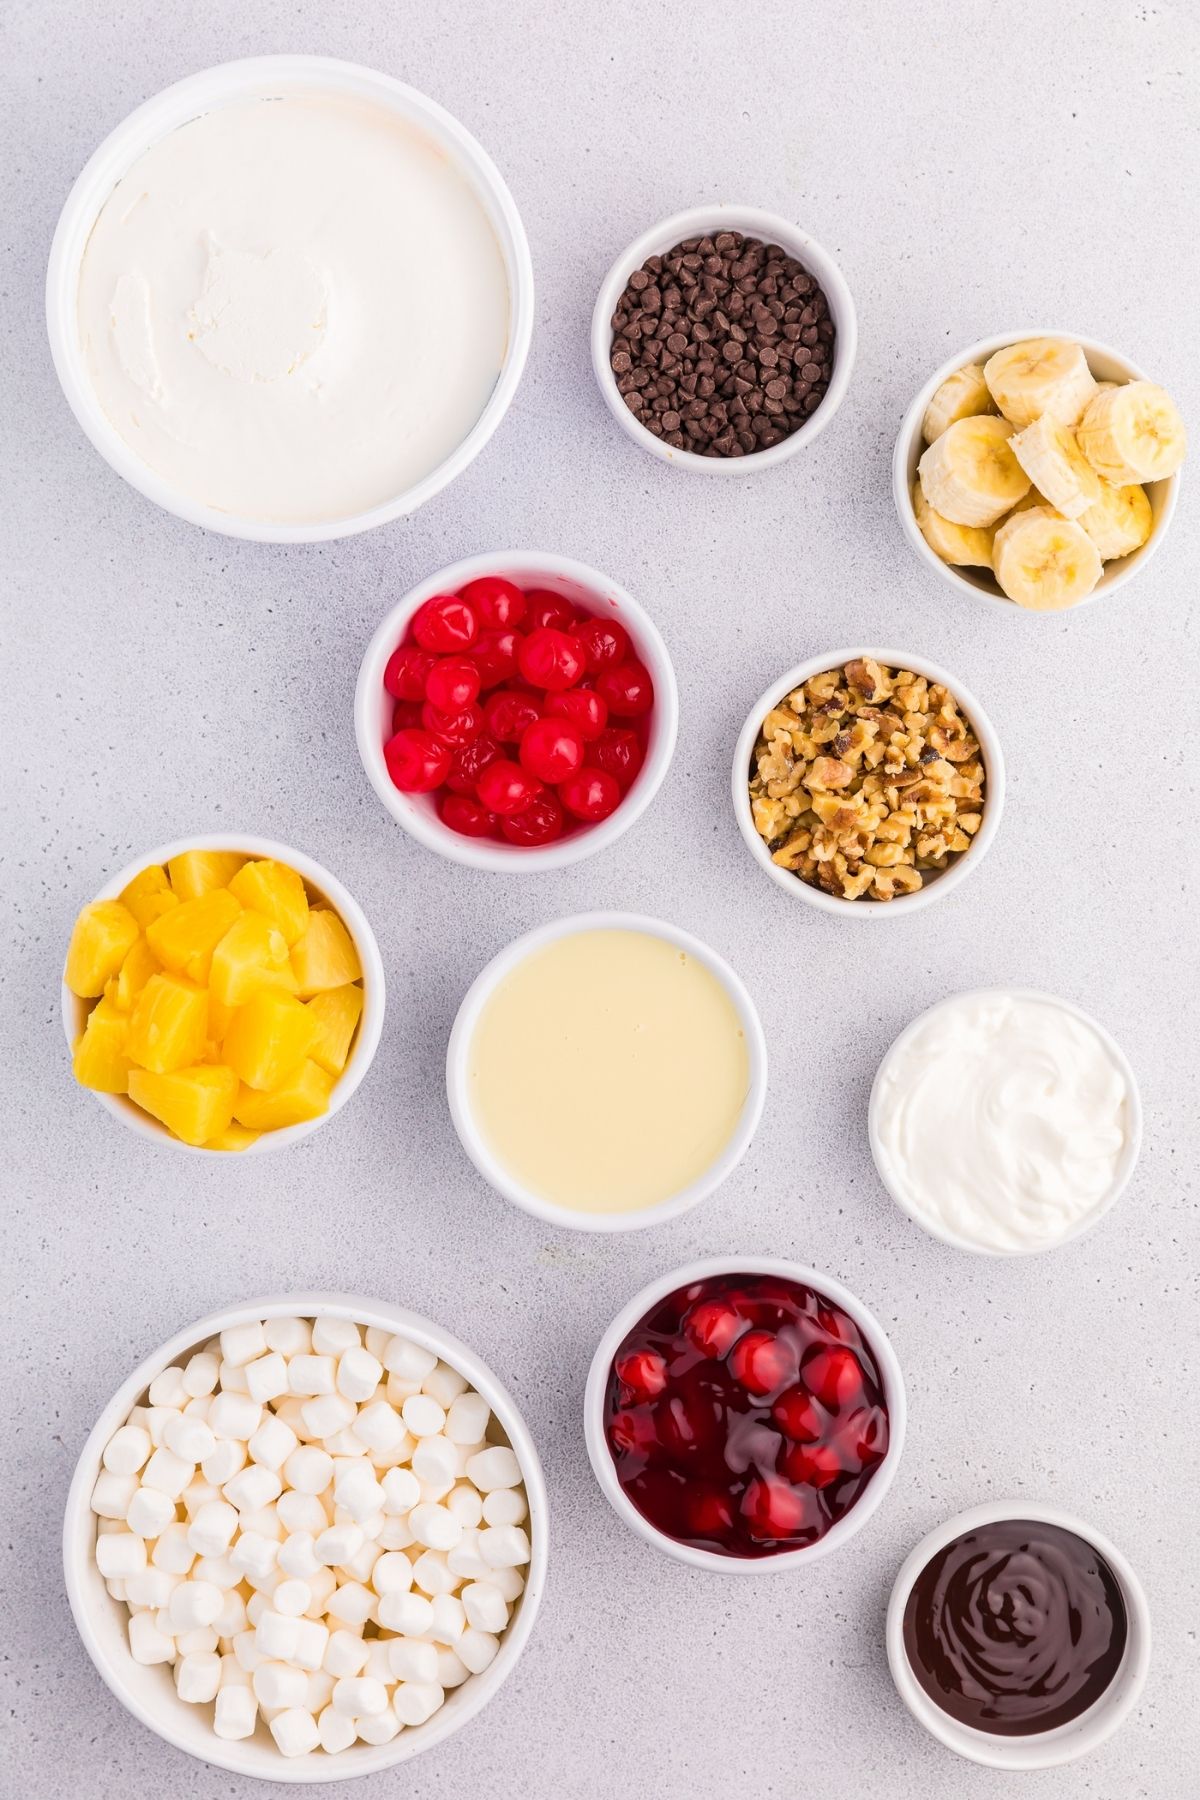 ingredients in bowls on white counter: Cool Whip, mini chocolate chips, sliced bananas, chopped walnuts, maraschino cherries, pineapple, condensed milk, sour cream, cherry pie filling, mini marshmallows, chocolate sauce